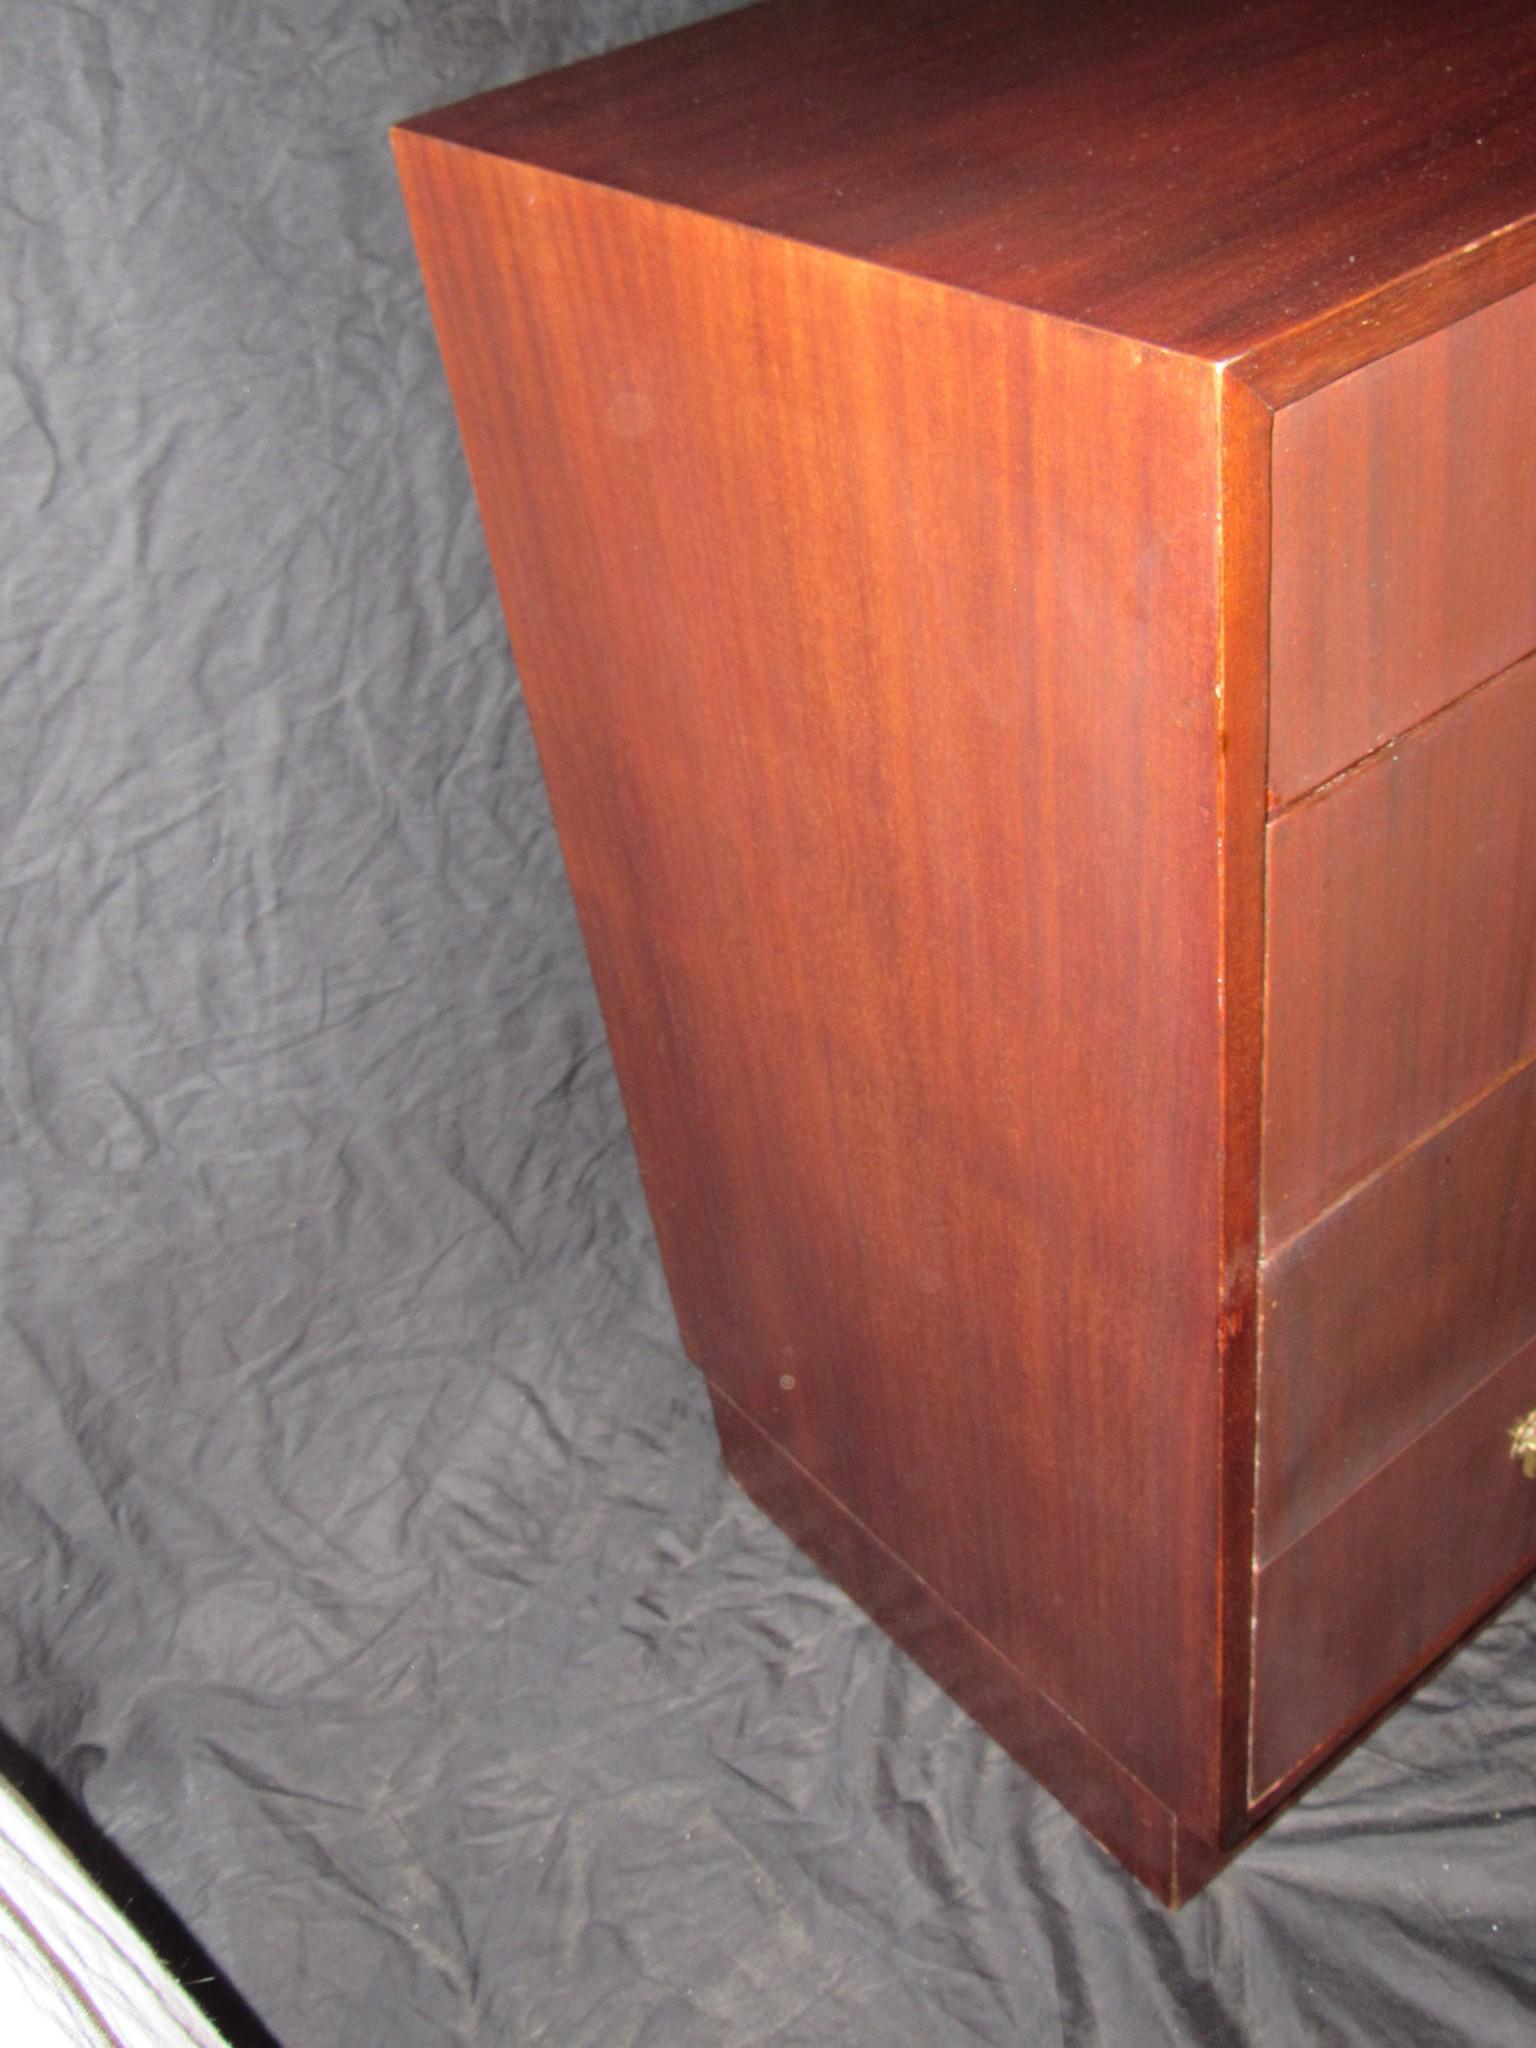 A matched pair of four-drawer Mahogany dressers from the 1940s.
Measures: The set back bases are 4 inches high.
The dressers are in excellent condition.